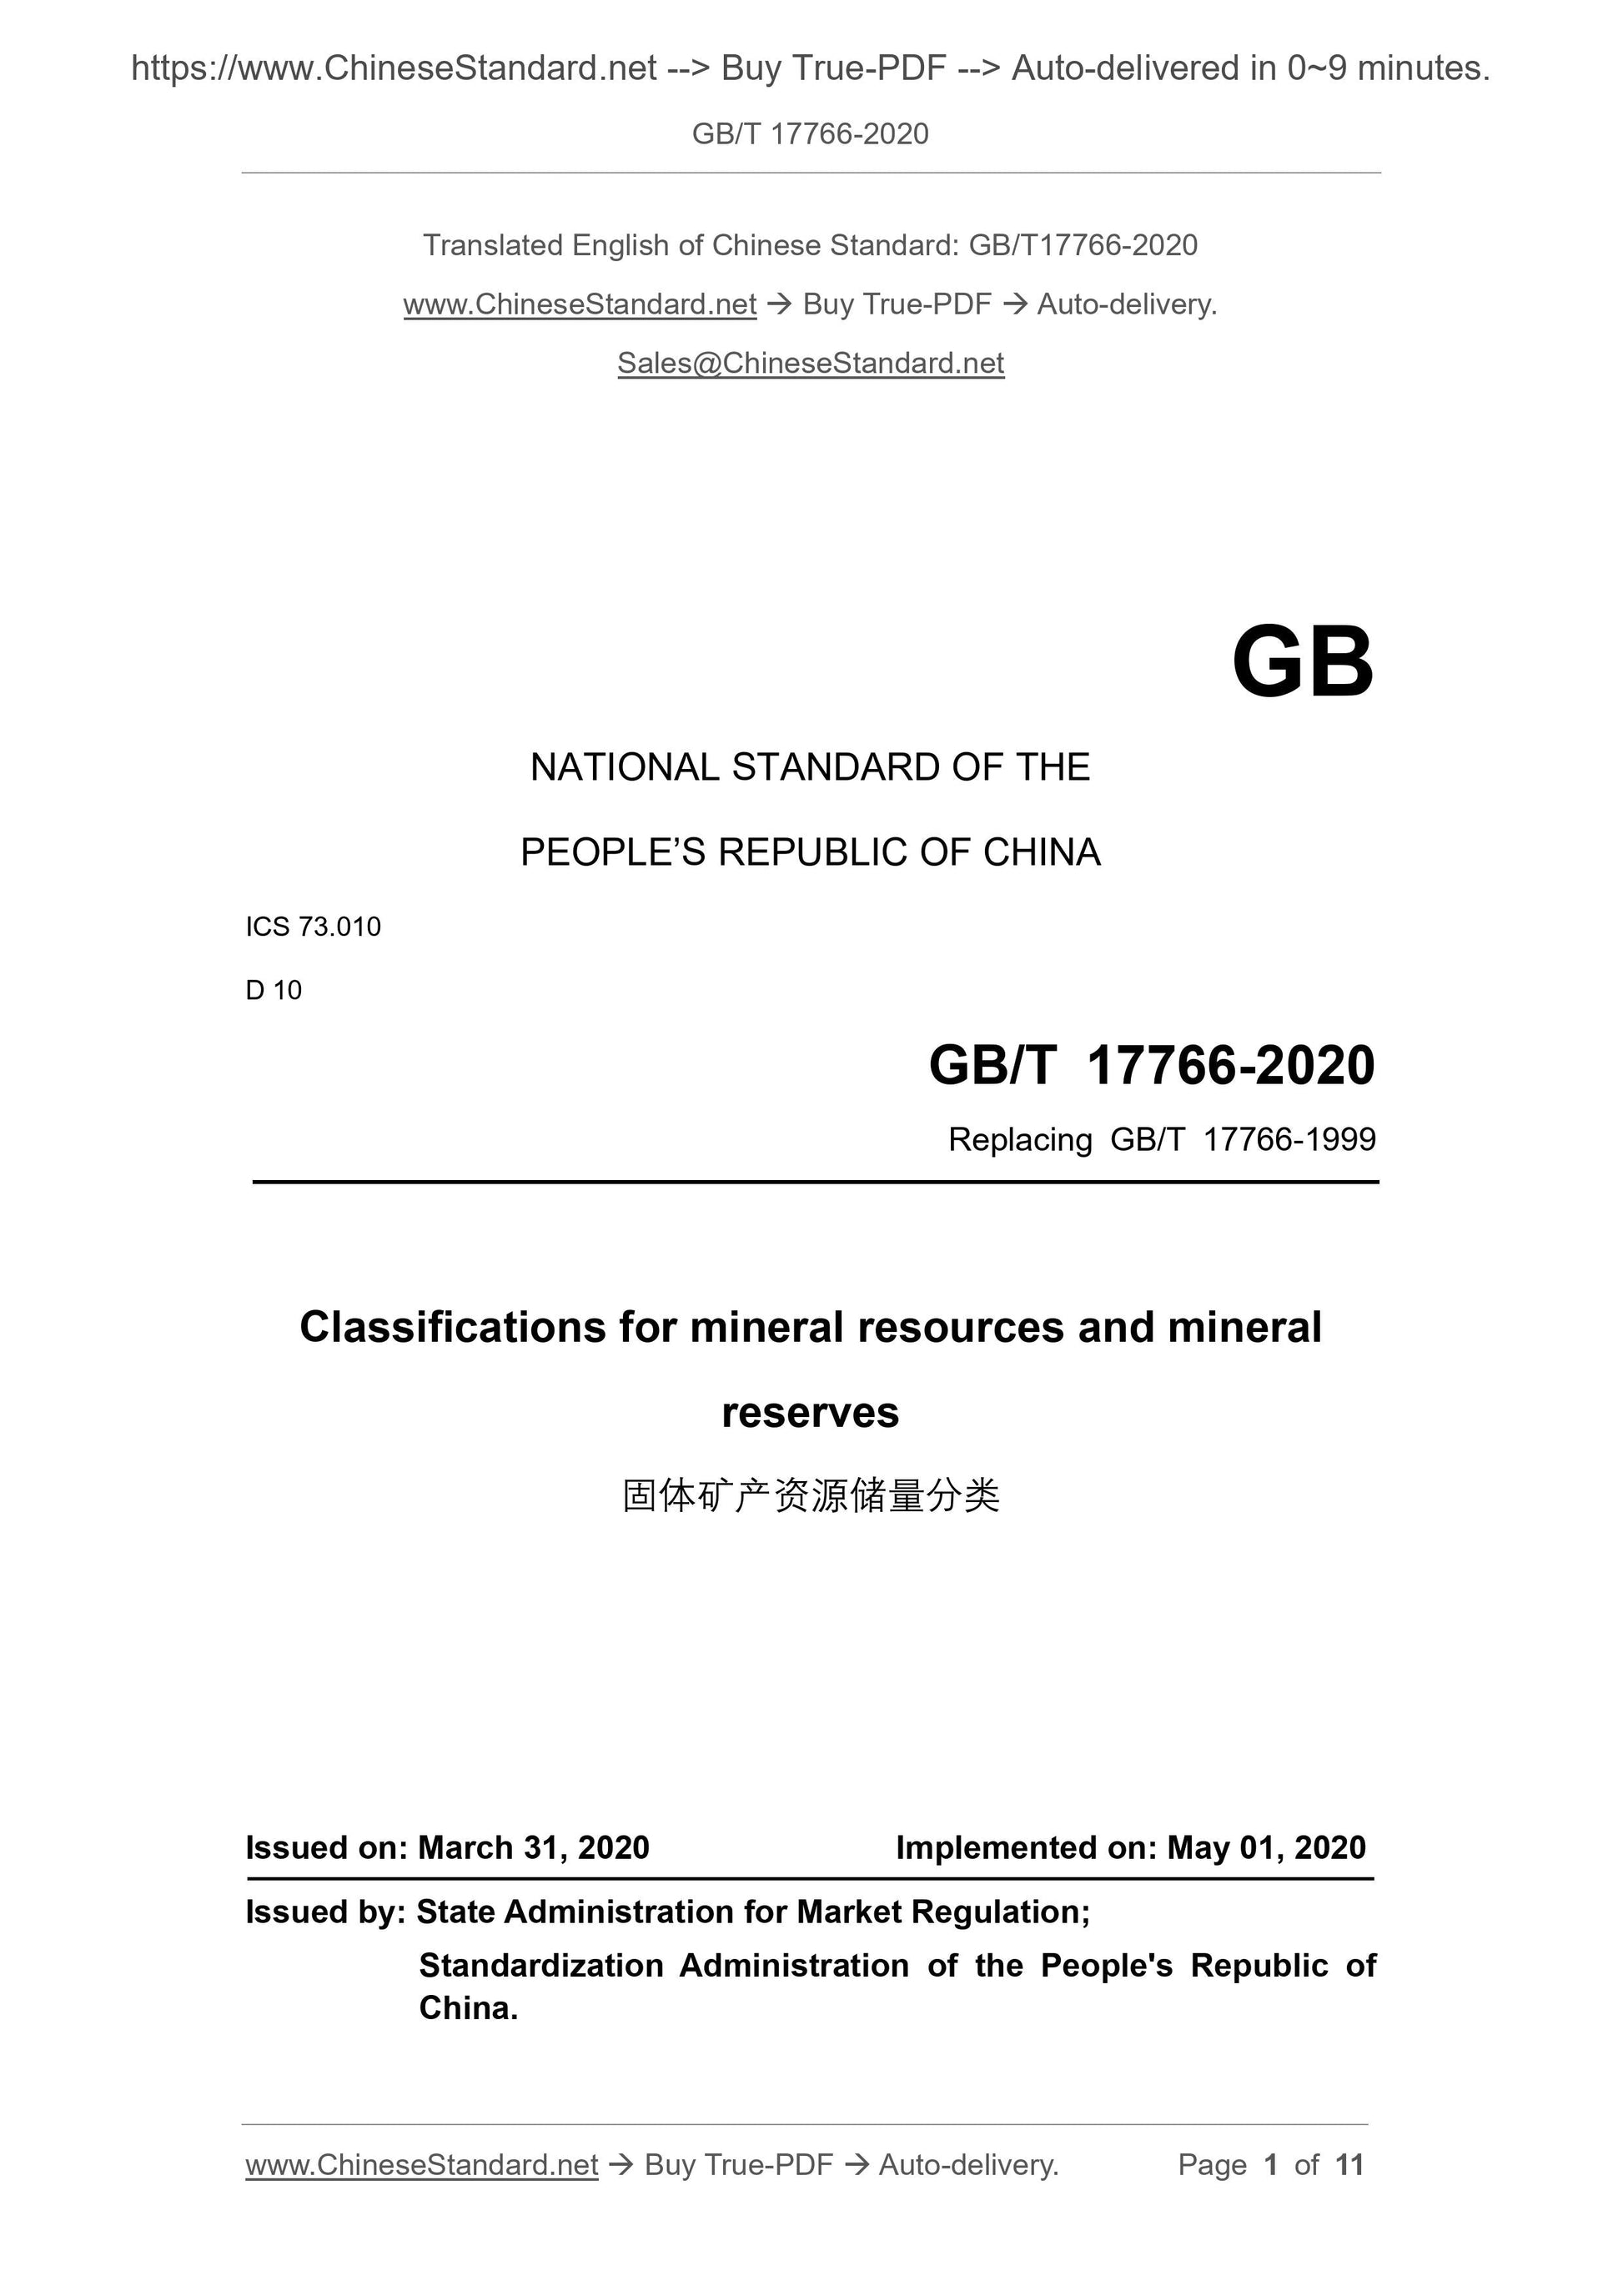 GB/T 17766-2020 Page 1